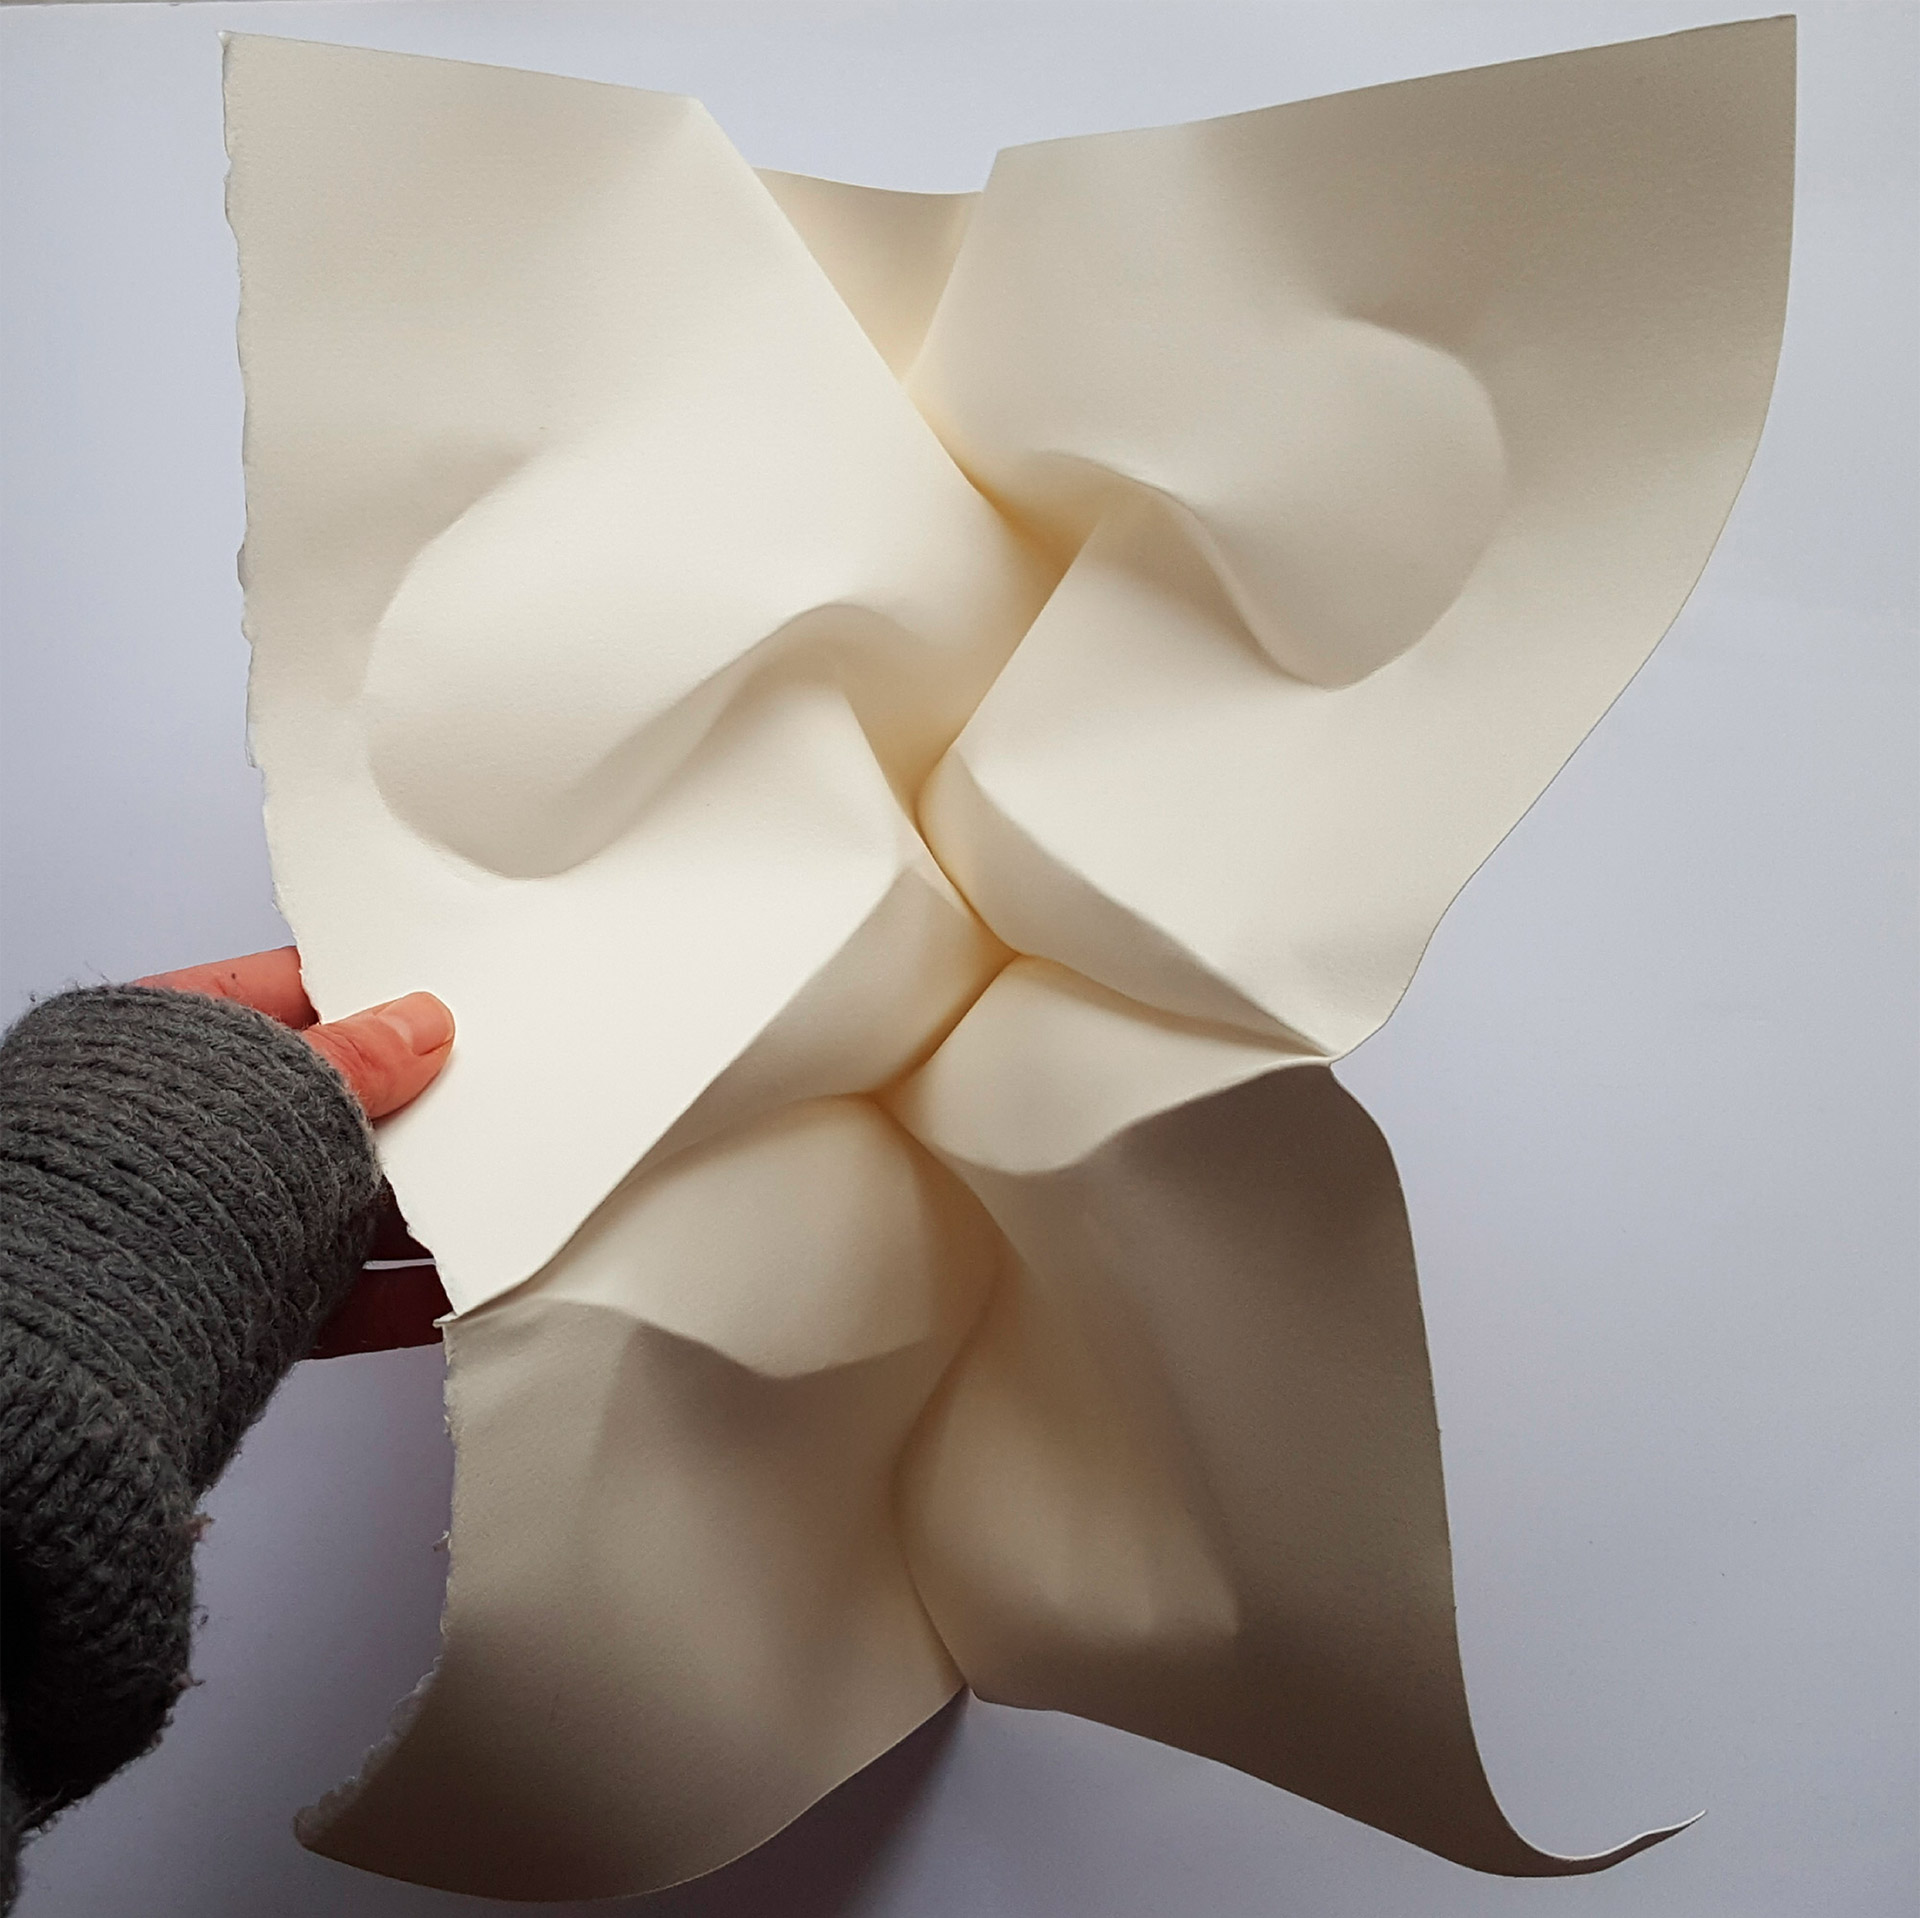 Download Wet Folded Paper Sculptures by Polly Verity | Daily design ...